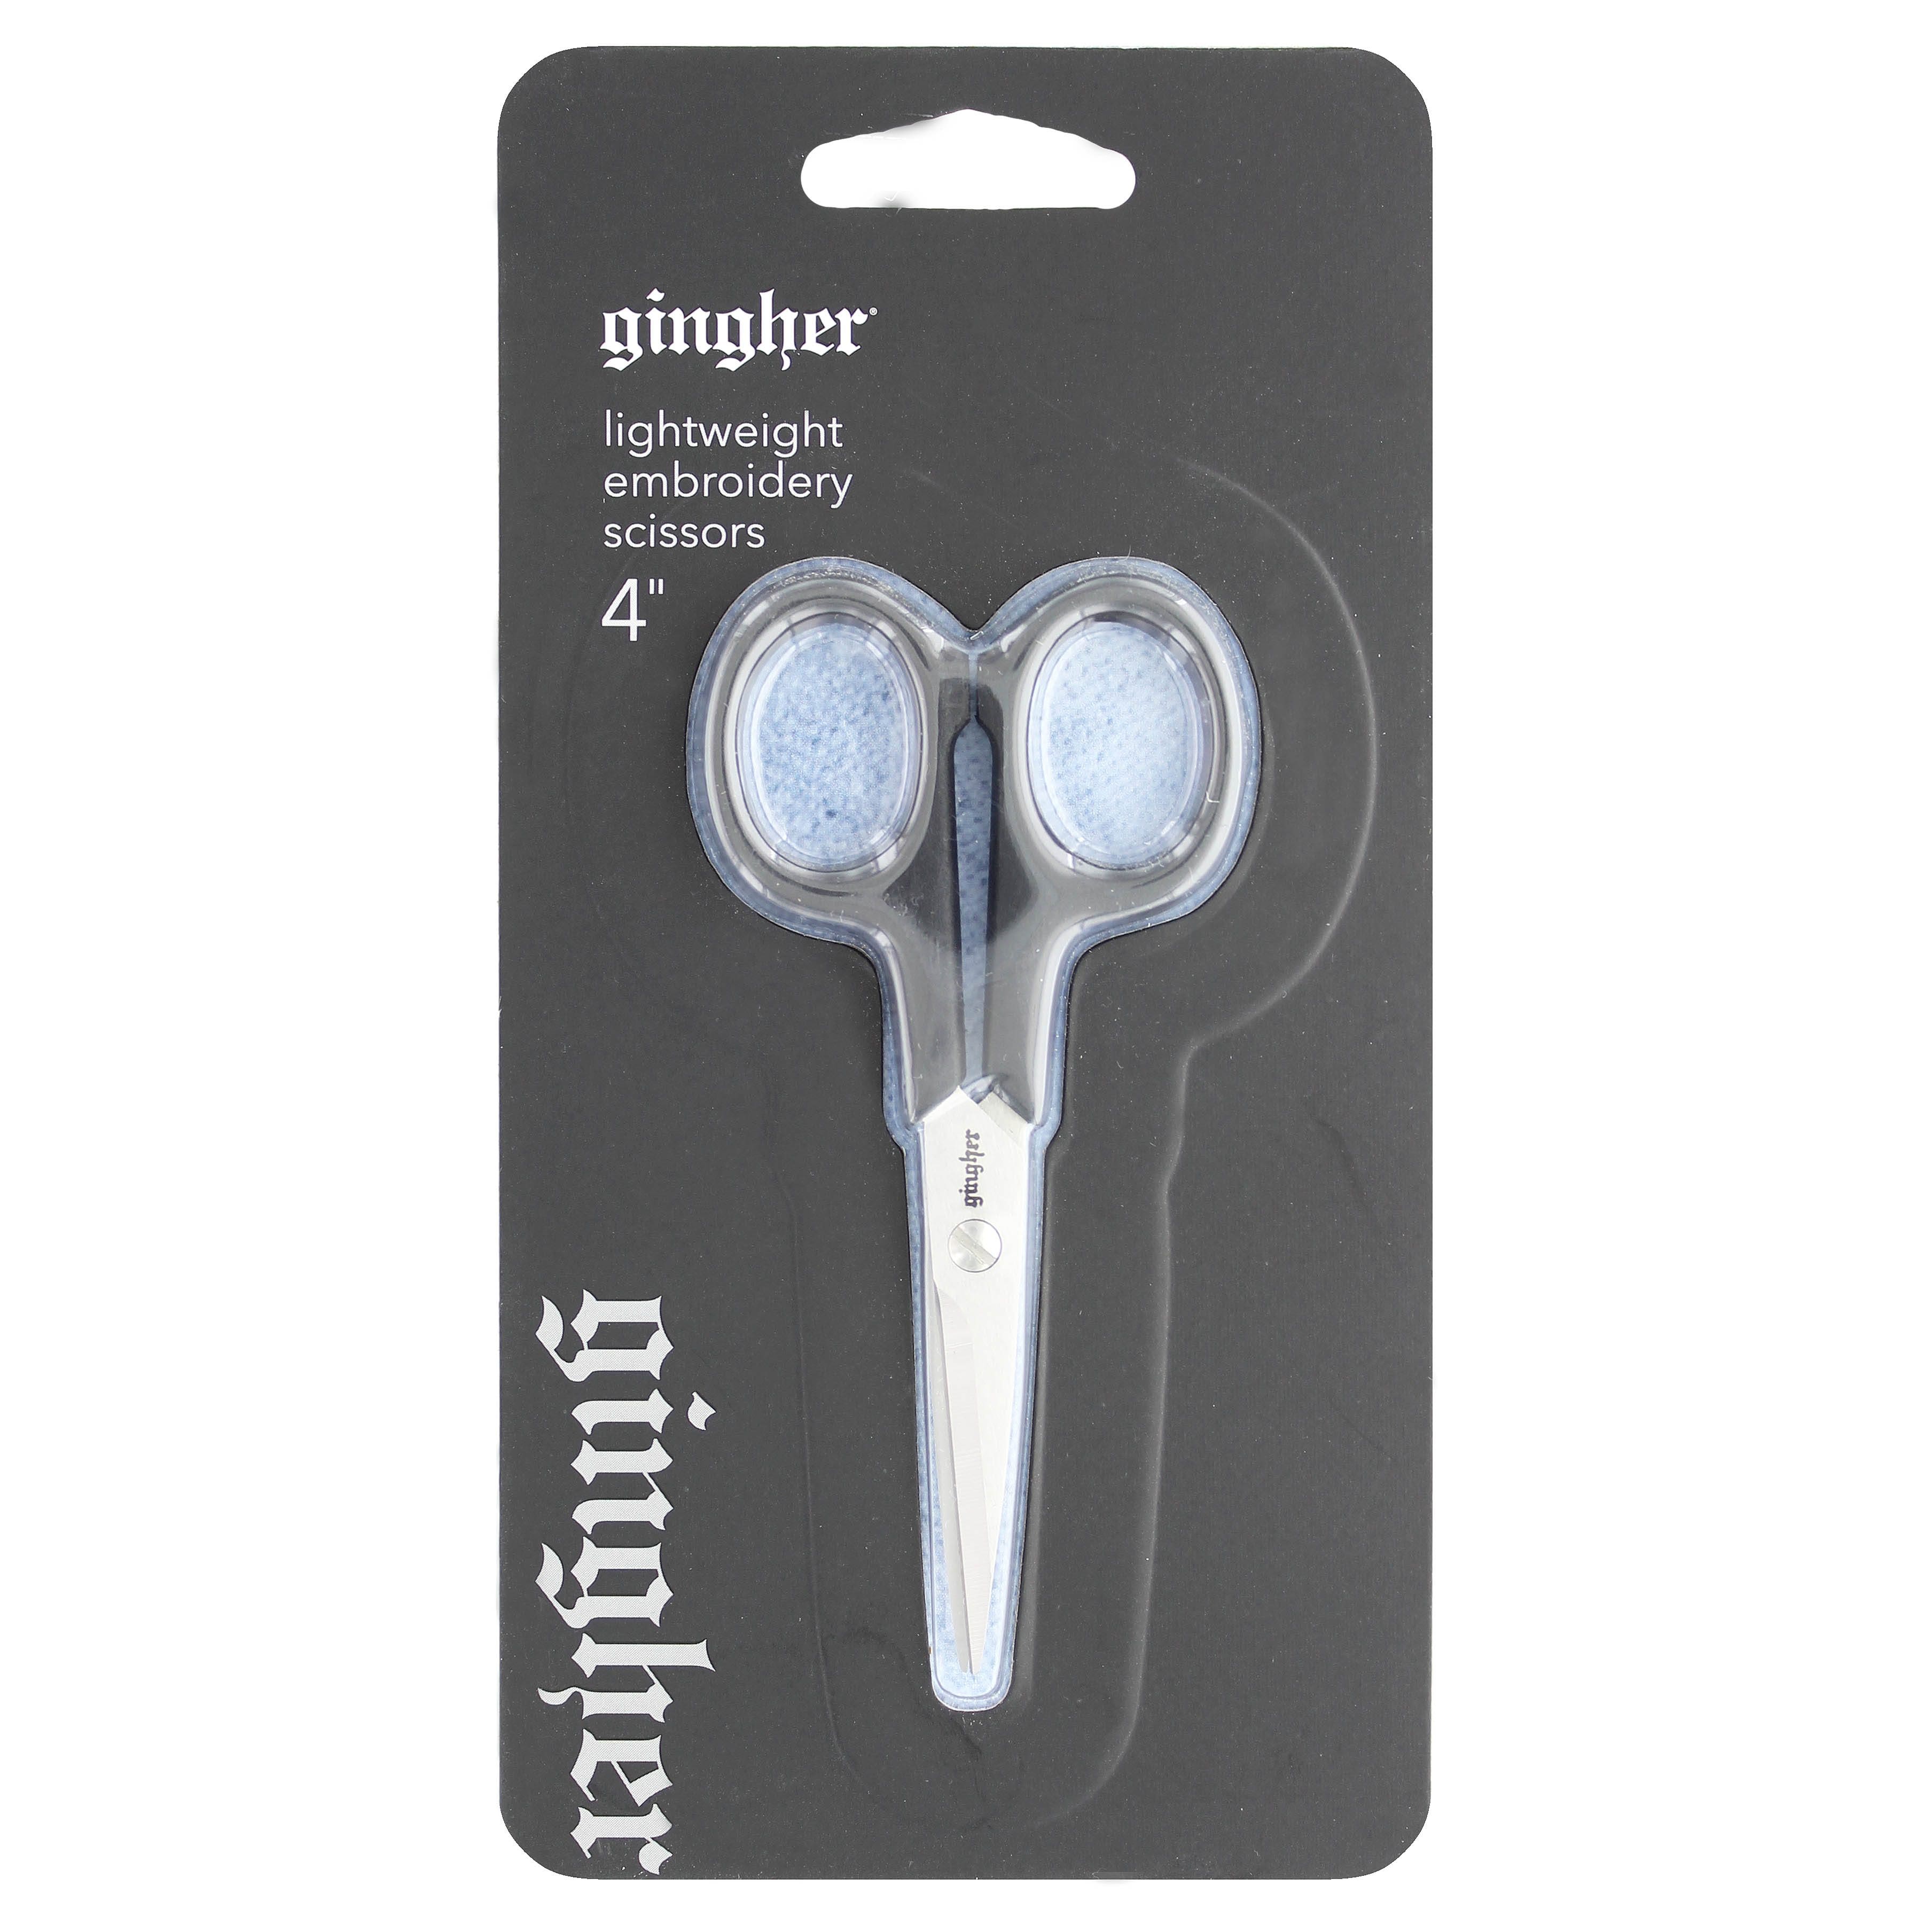 Gingher 4 Lightweight Embroidery Scissor – Simple Stitches Fabric